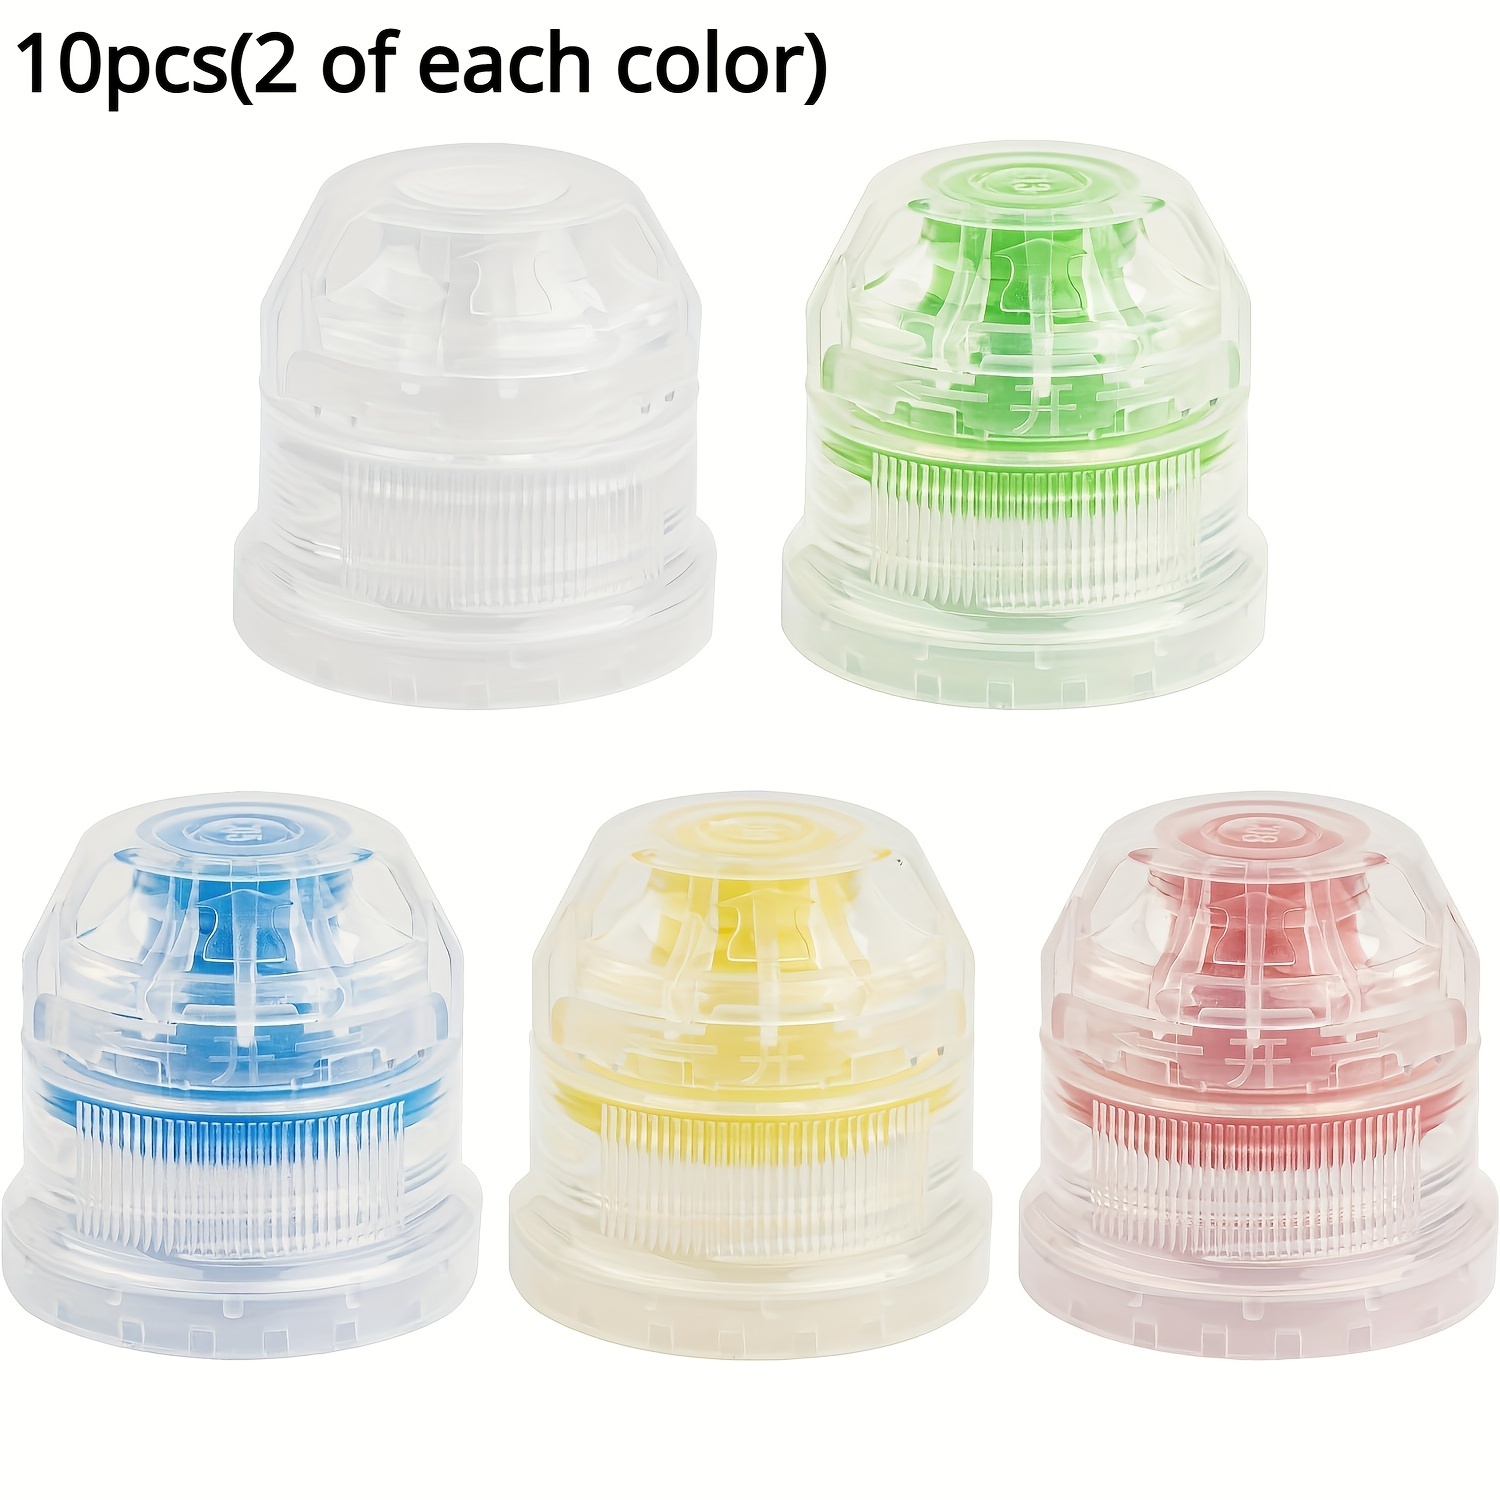 

10-piece Leakproof Flip-top Water Bottle Caps, 1.1" Fit, Durable Pp - Spill-proof & Easy Install, Assorted Colors